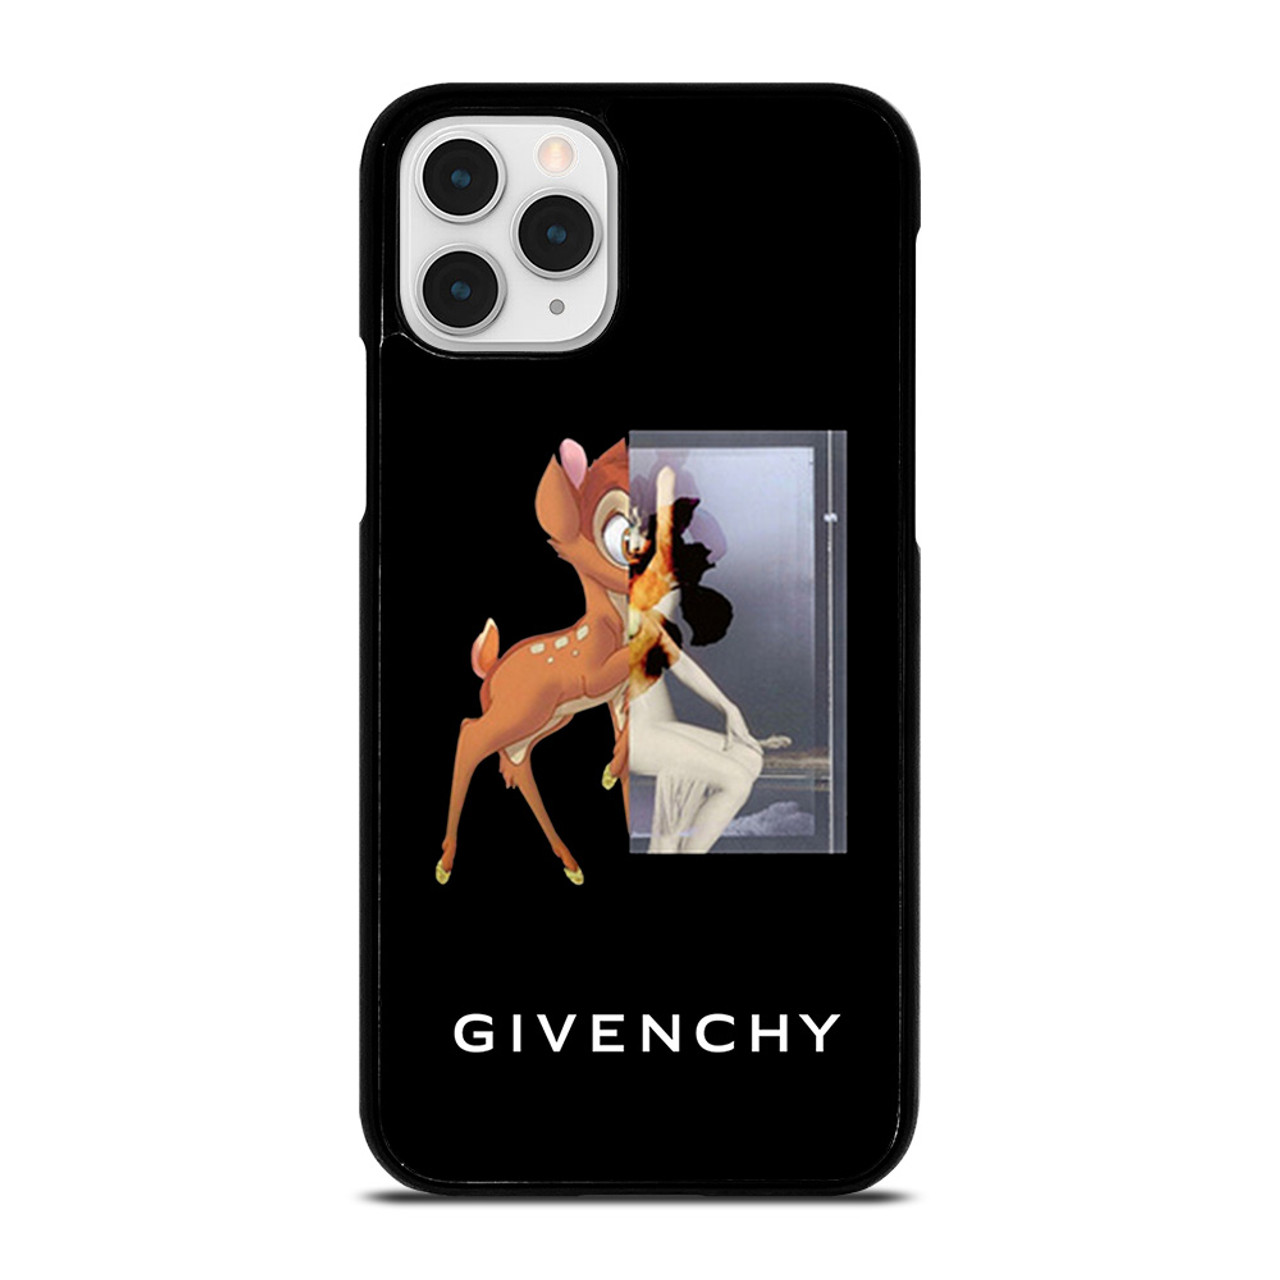 GIVENCHY BAMBI iPhone 11 Pro Case Cover